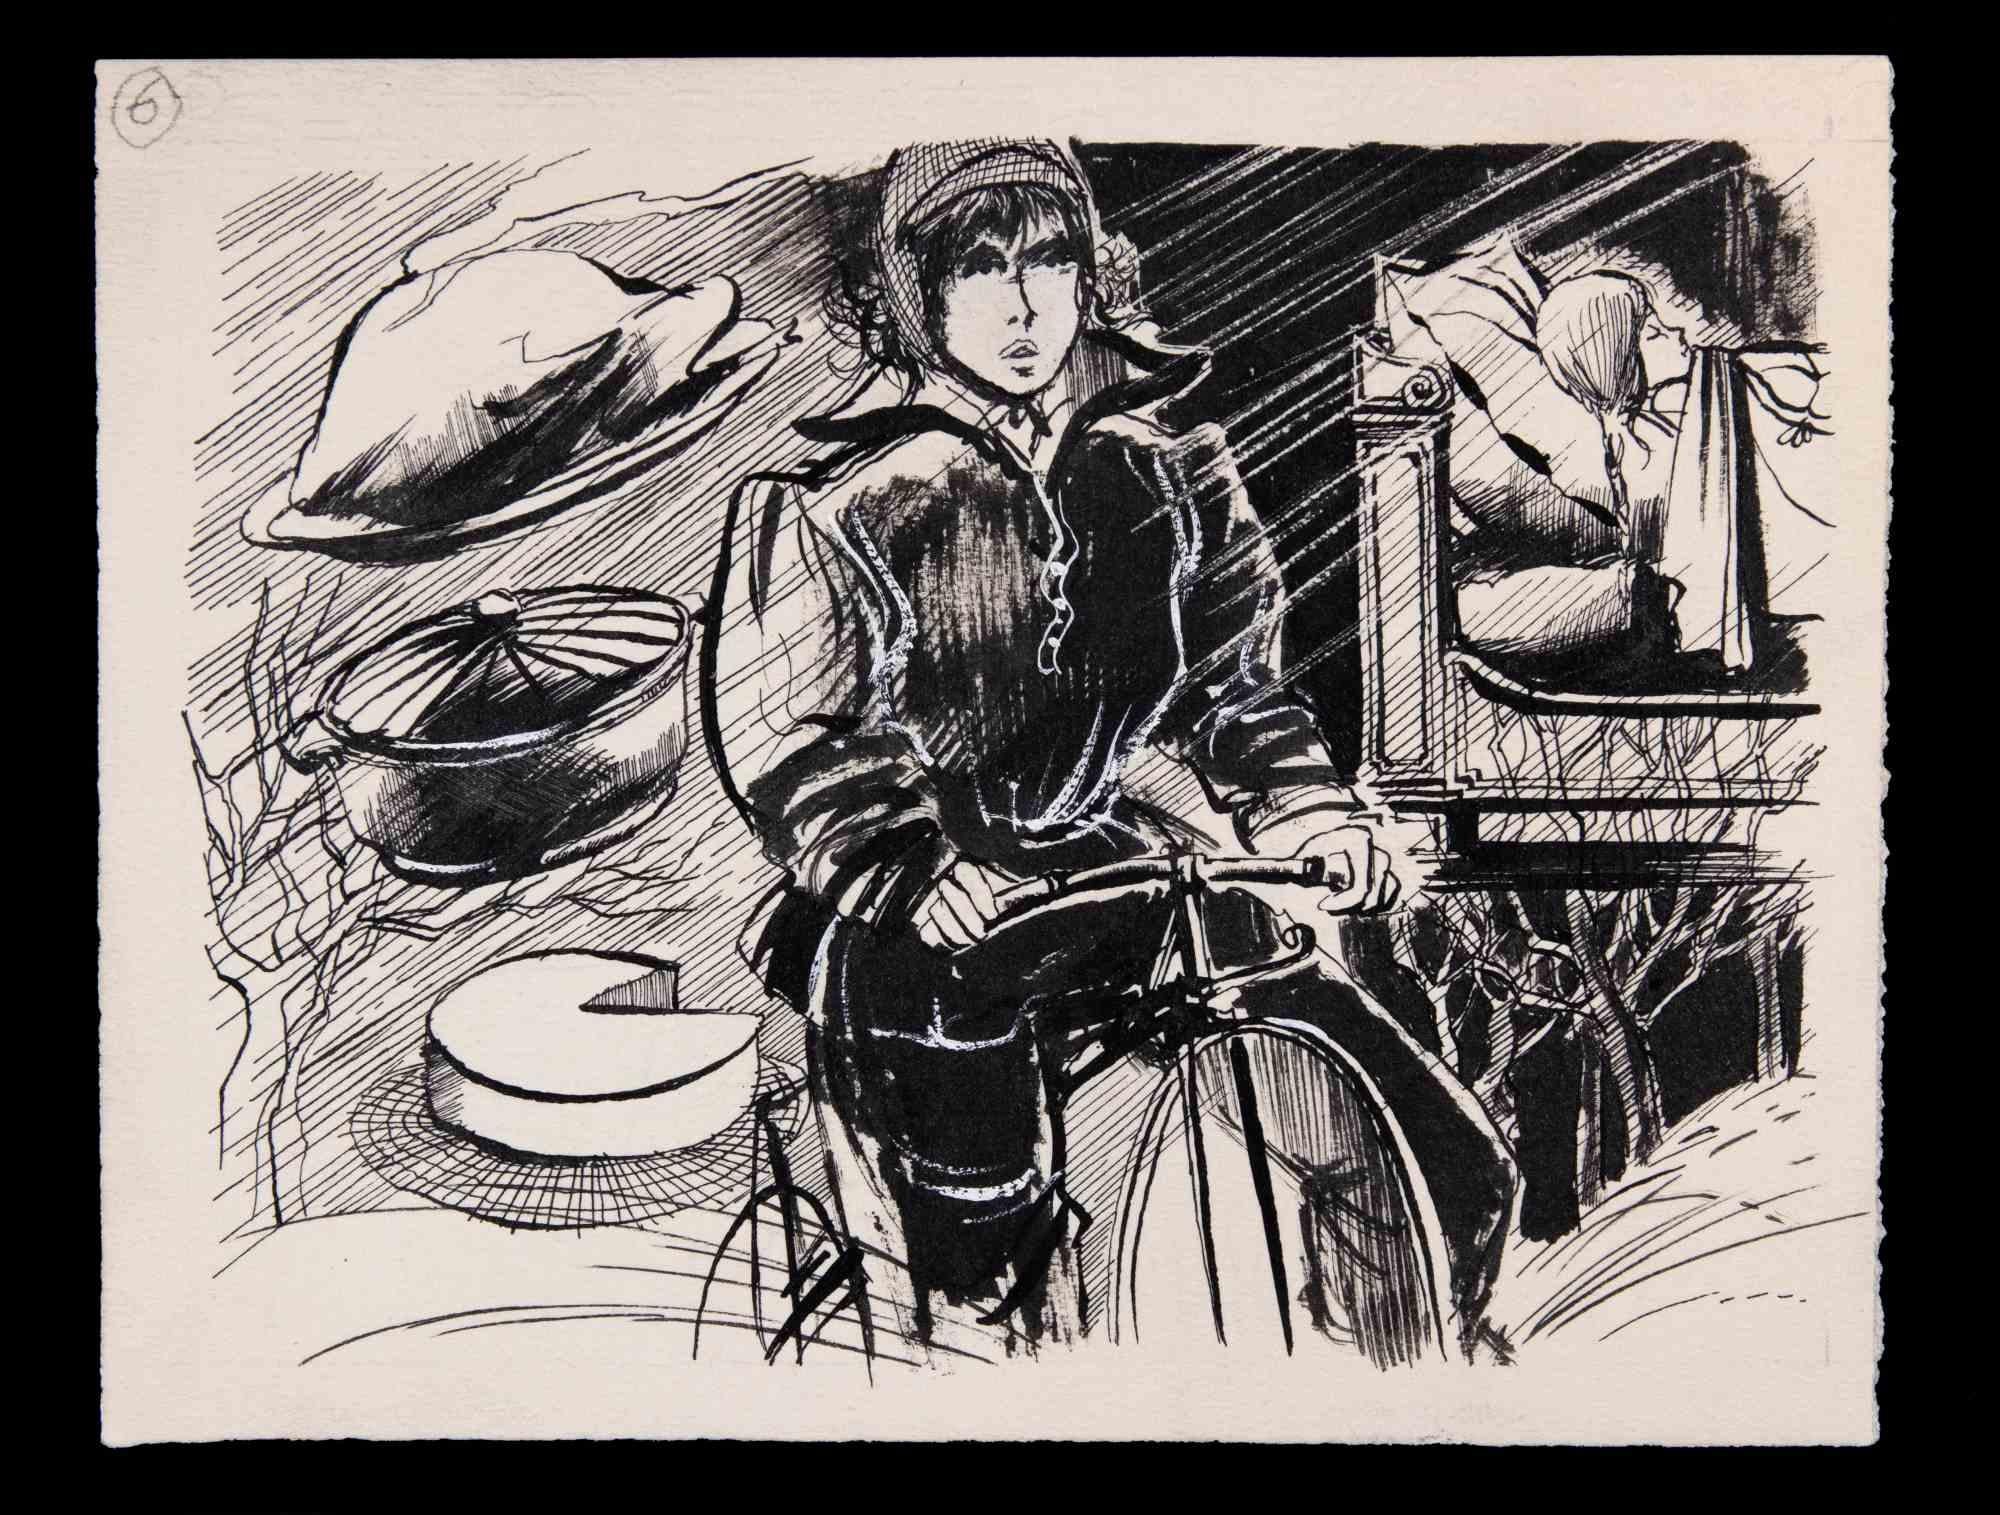 Bike Woman - Drawing by Norbert Meyre - Mid-20th Century